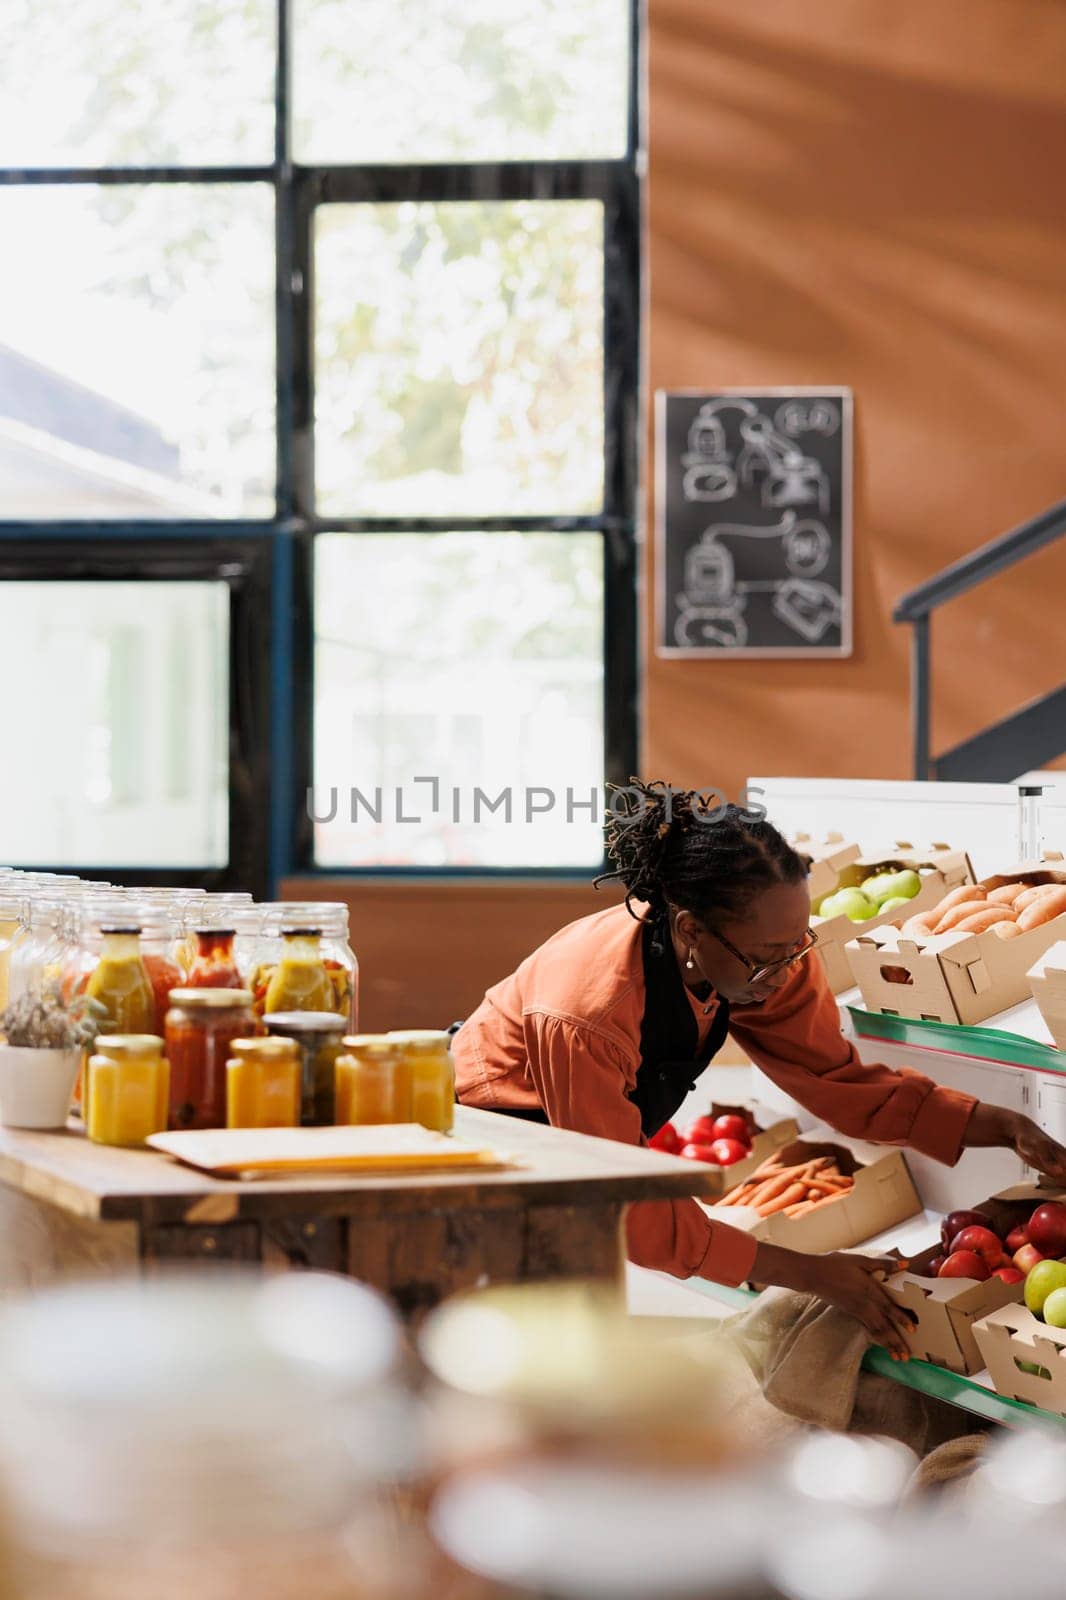 Vendor setting up an environmentally friendly business that sells bulk goods, plastic free packaging, and fresh produce. Black woman stocking shelves with boxes of produce and fruits from farms.